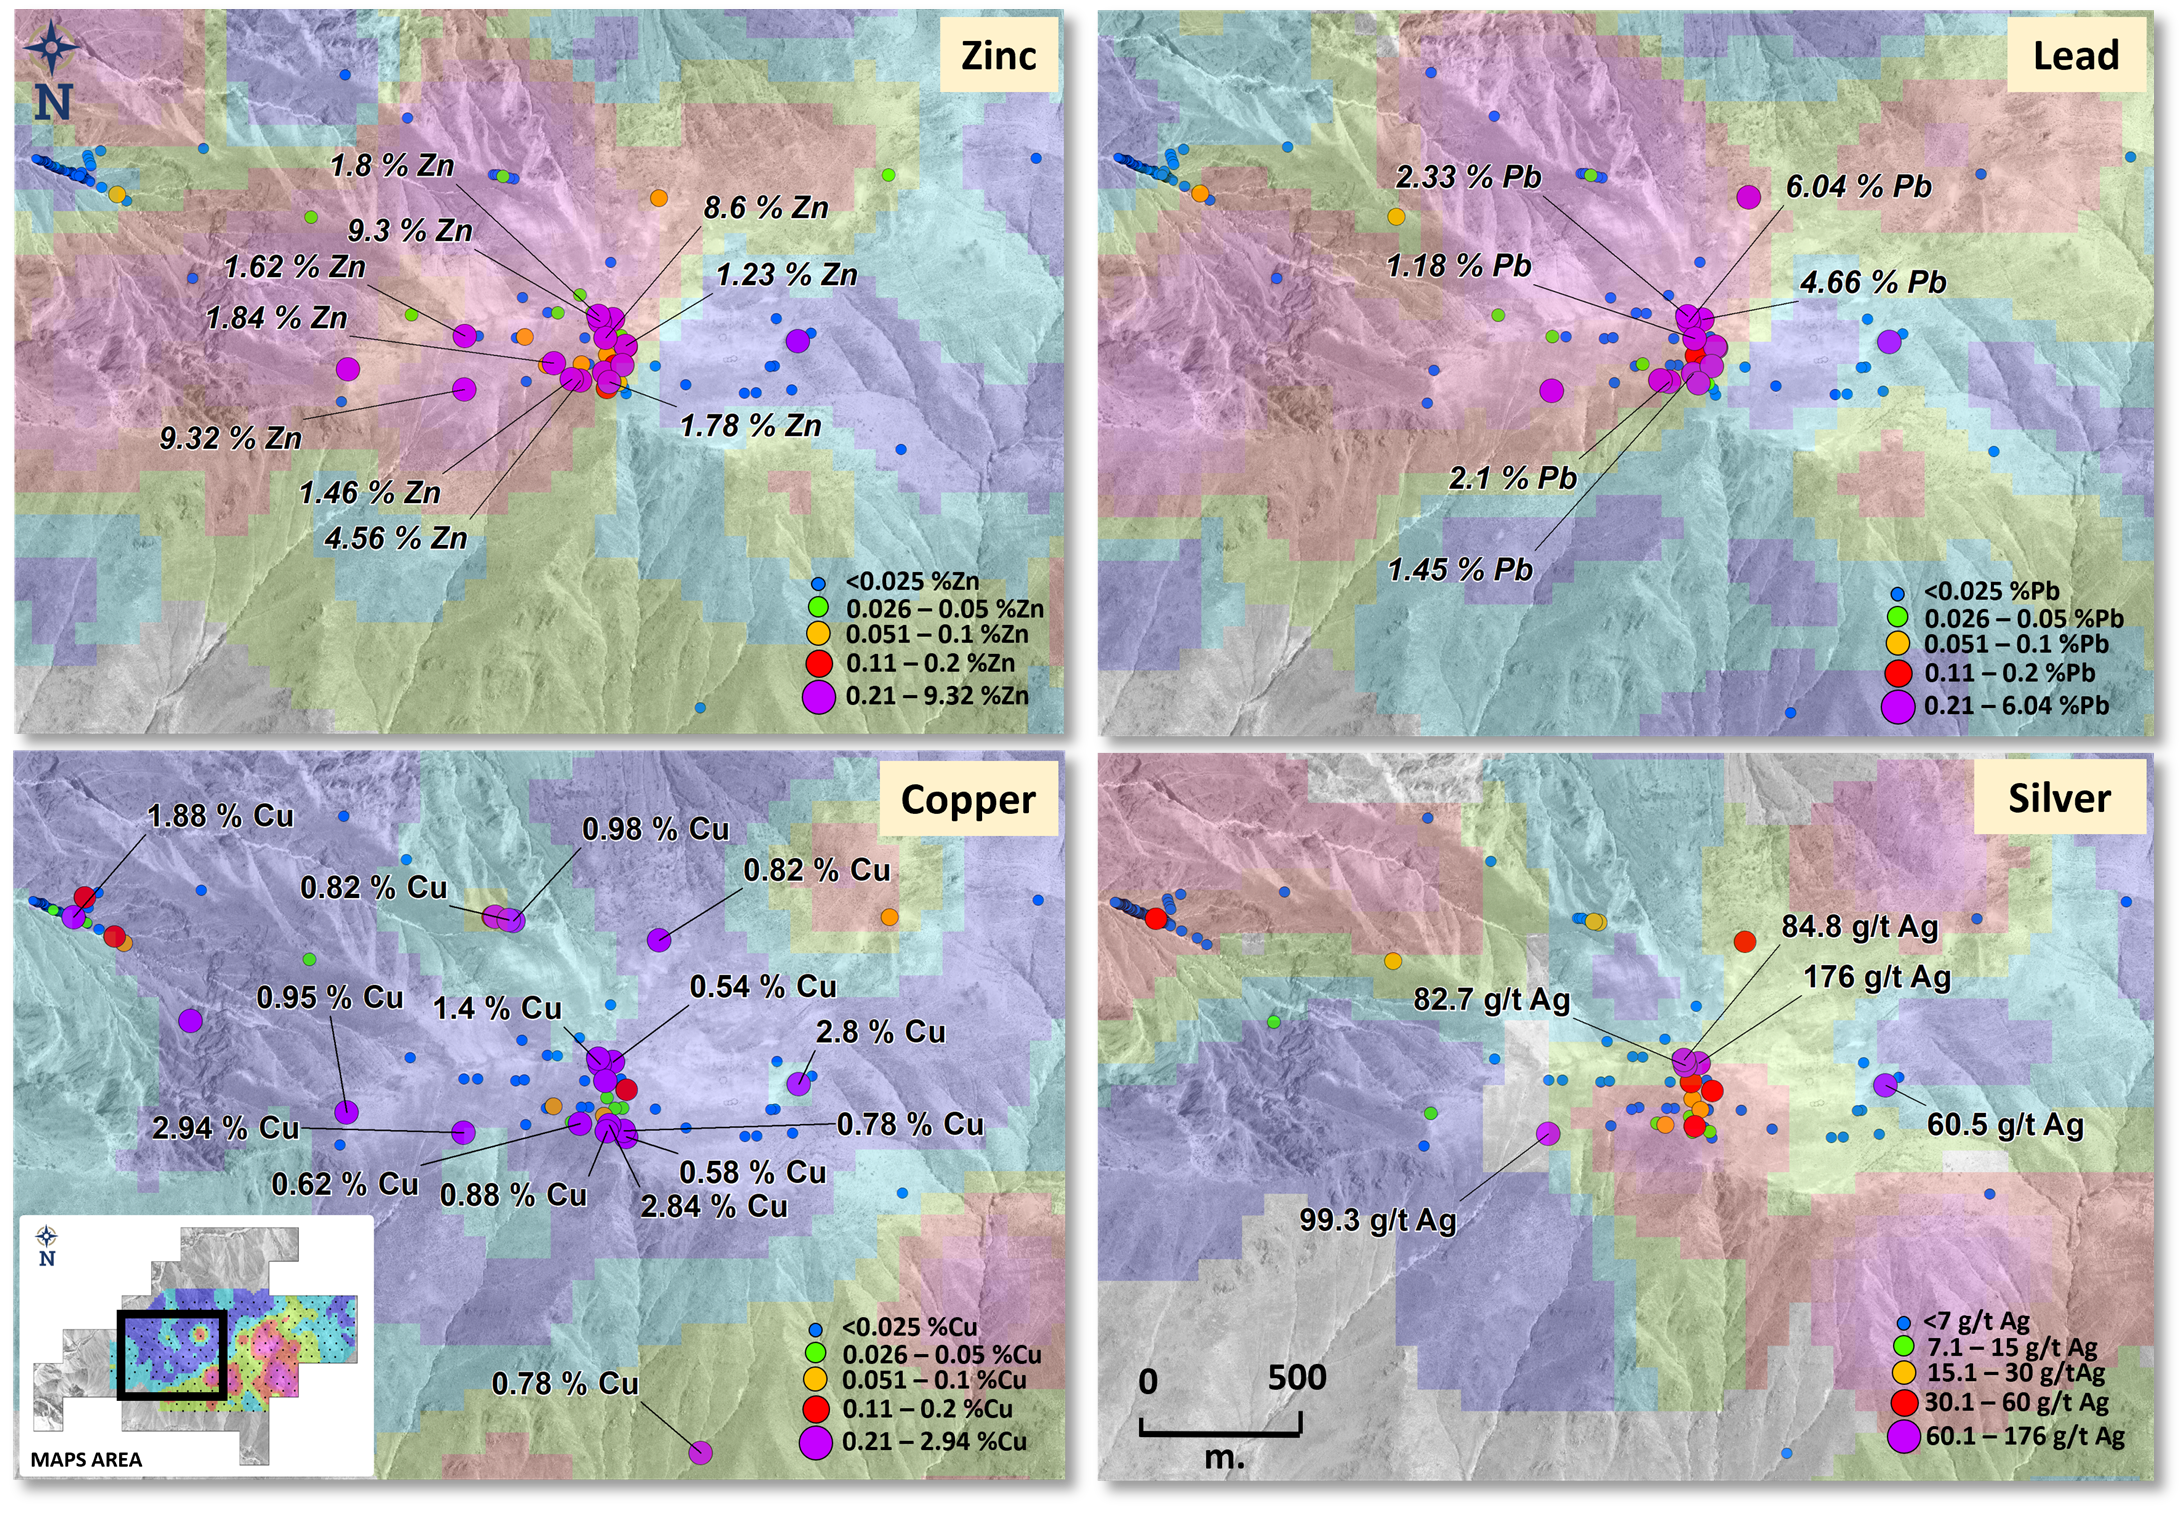 Rock sampling results in the vicinity of the Blanco skarn zone.  Anomalous elements are typical of skarn mineralized zones, including zinc, lead, copper and silver shown.  Samples greater than 1% zinc, 1% lead, 0.5% copper, and 50 g/t silver are individually labelled.